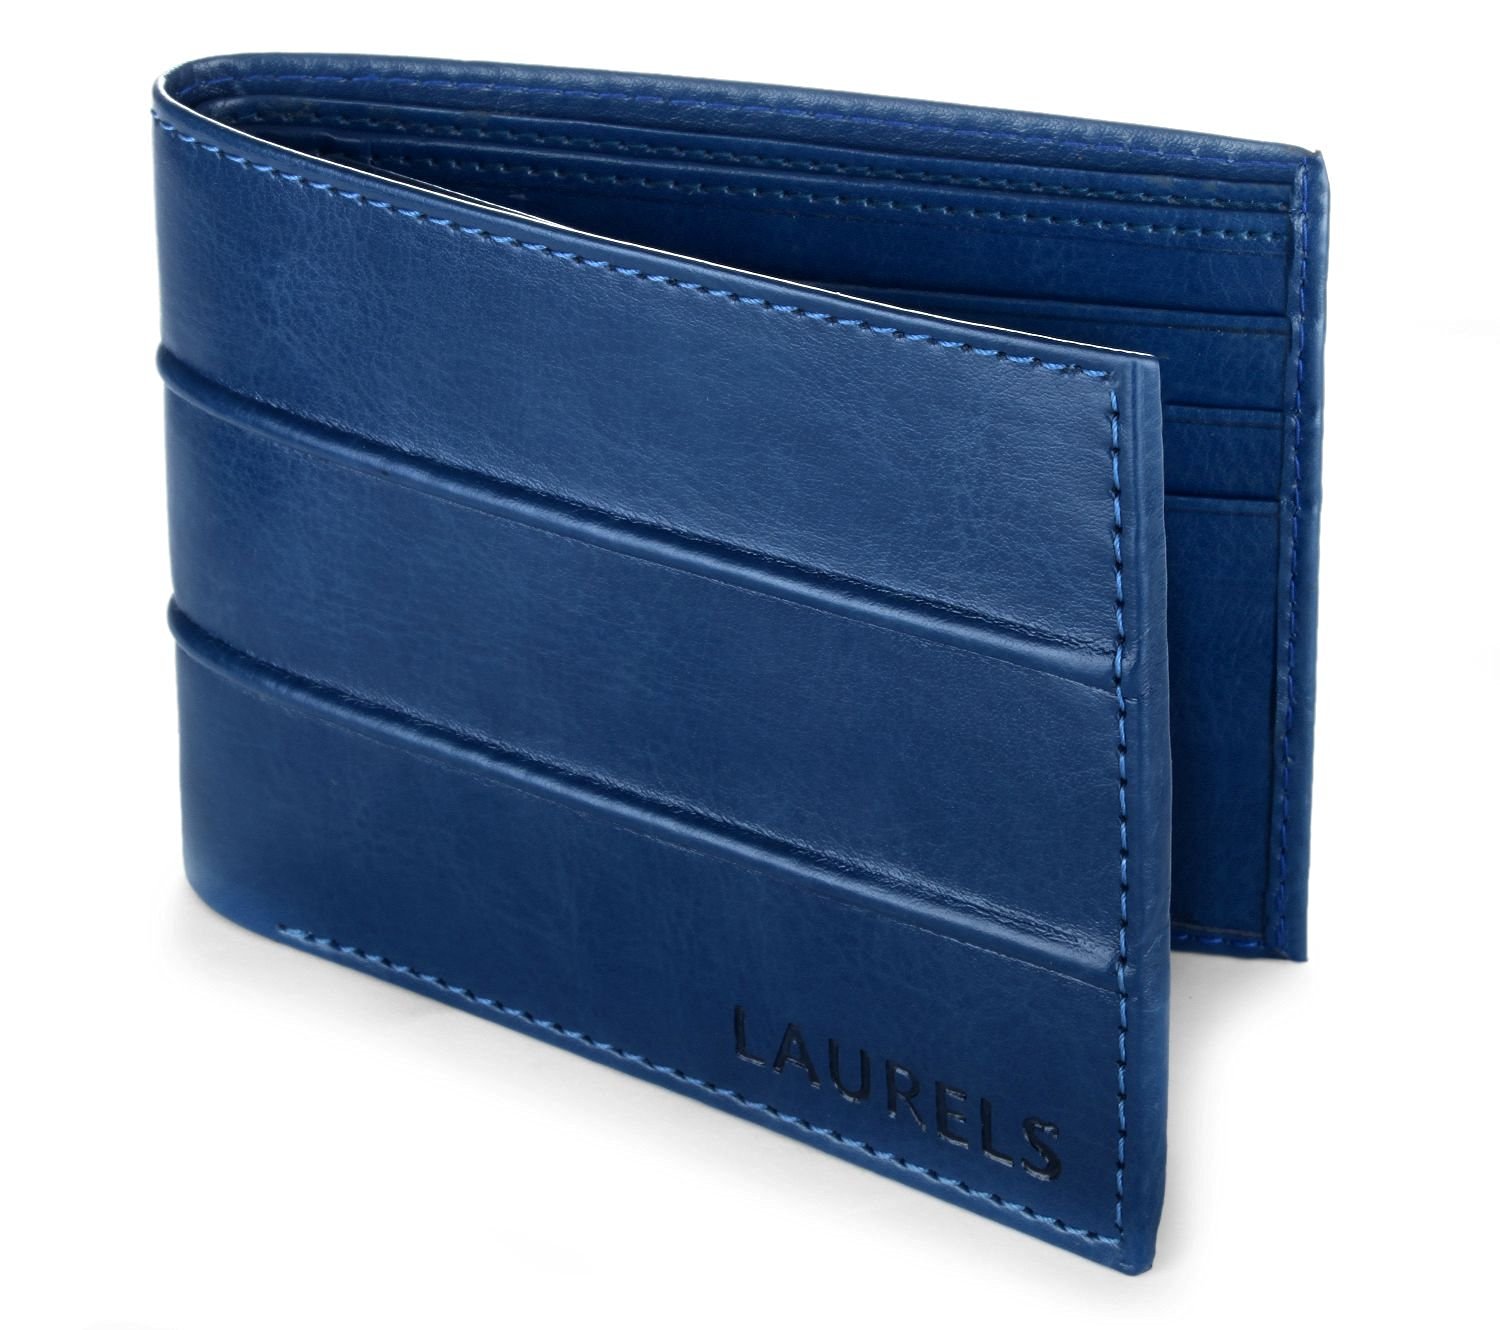 Amazon Laurels Wallets with 90% Off